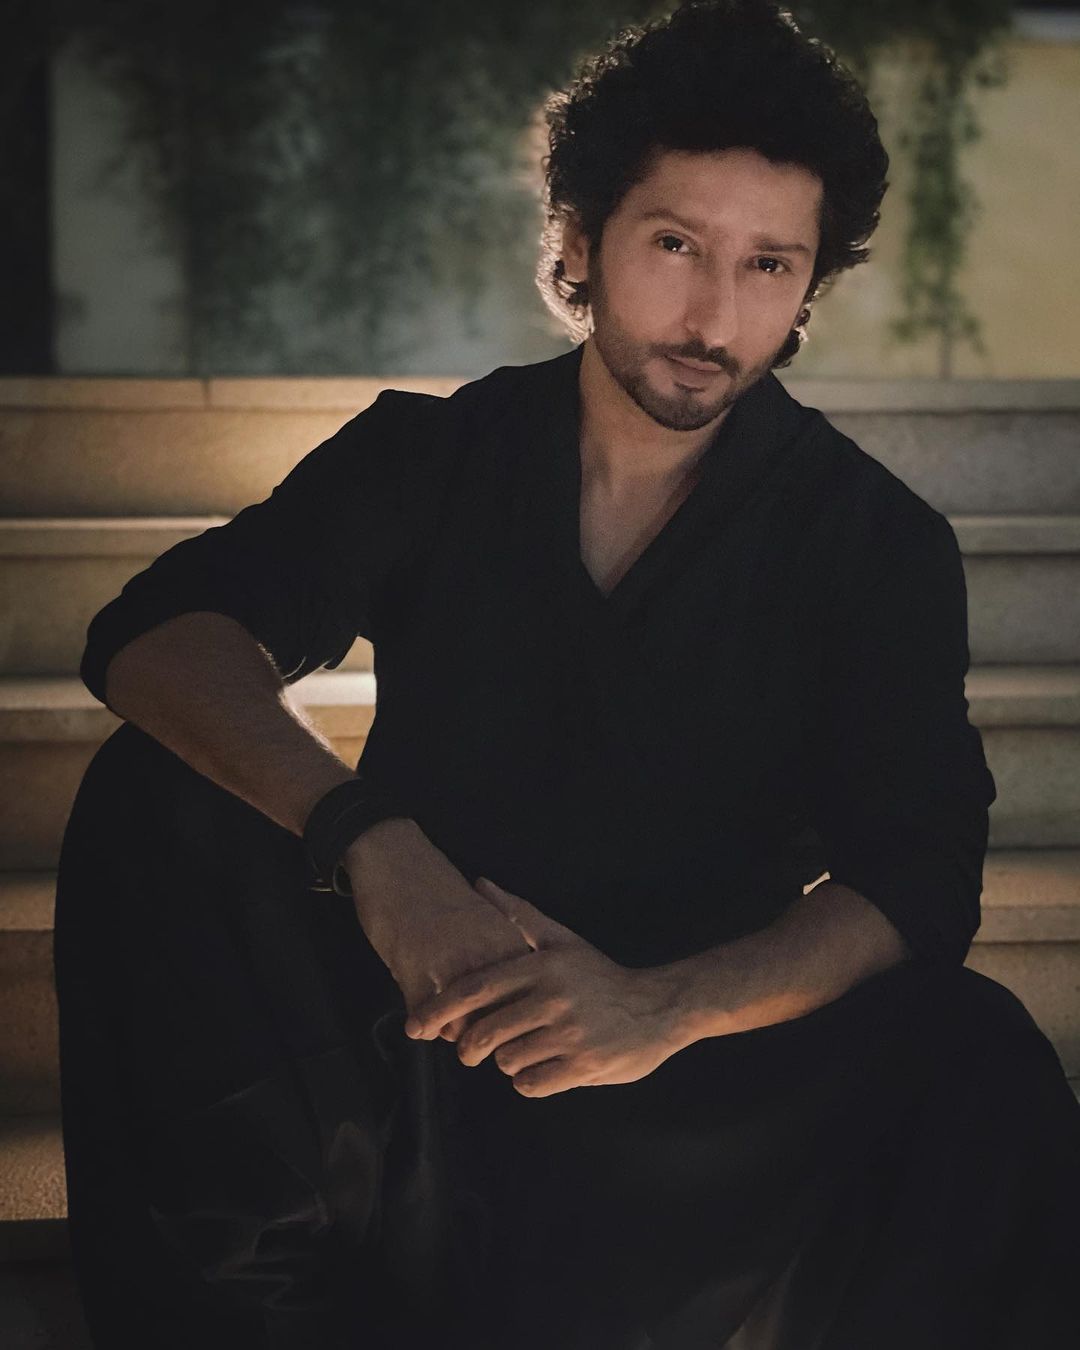 Fingers Crossed! Na Bole Tum Na Maine Kuch Kaha Fame Kunal Karan Kapoor Says Things Are Working Out Now! He Is All Set To Enter The Show Udaariyaan.